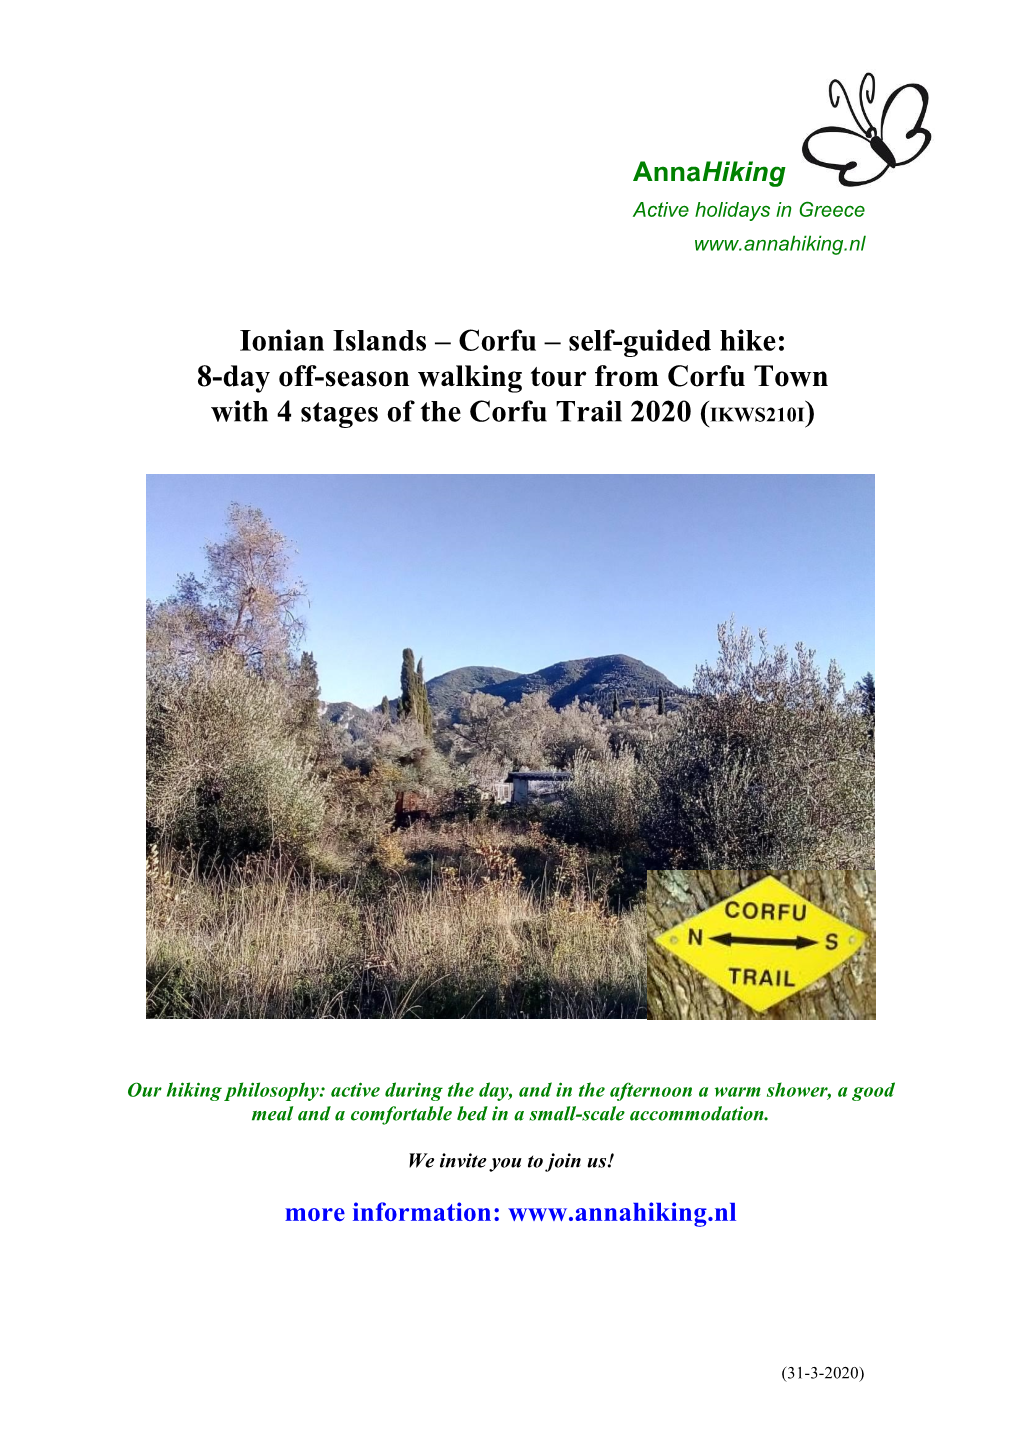 Corfu – Self-Guided Hike: 8-Day Off-Season Walking Tour from Corfu Town with 4 Stages of the Corfu Trail 2020 (IKWS210I)